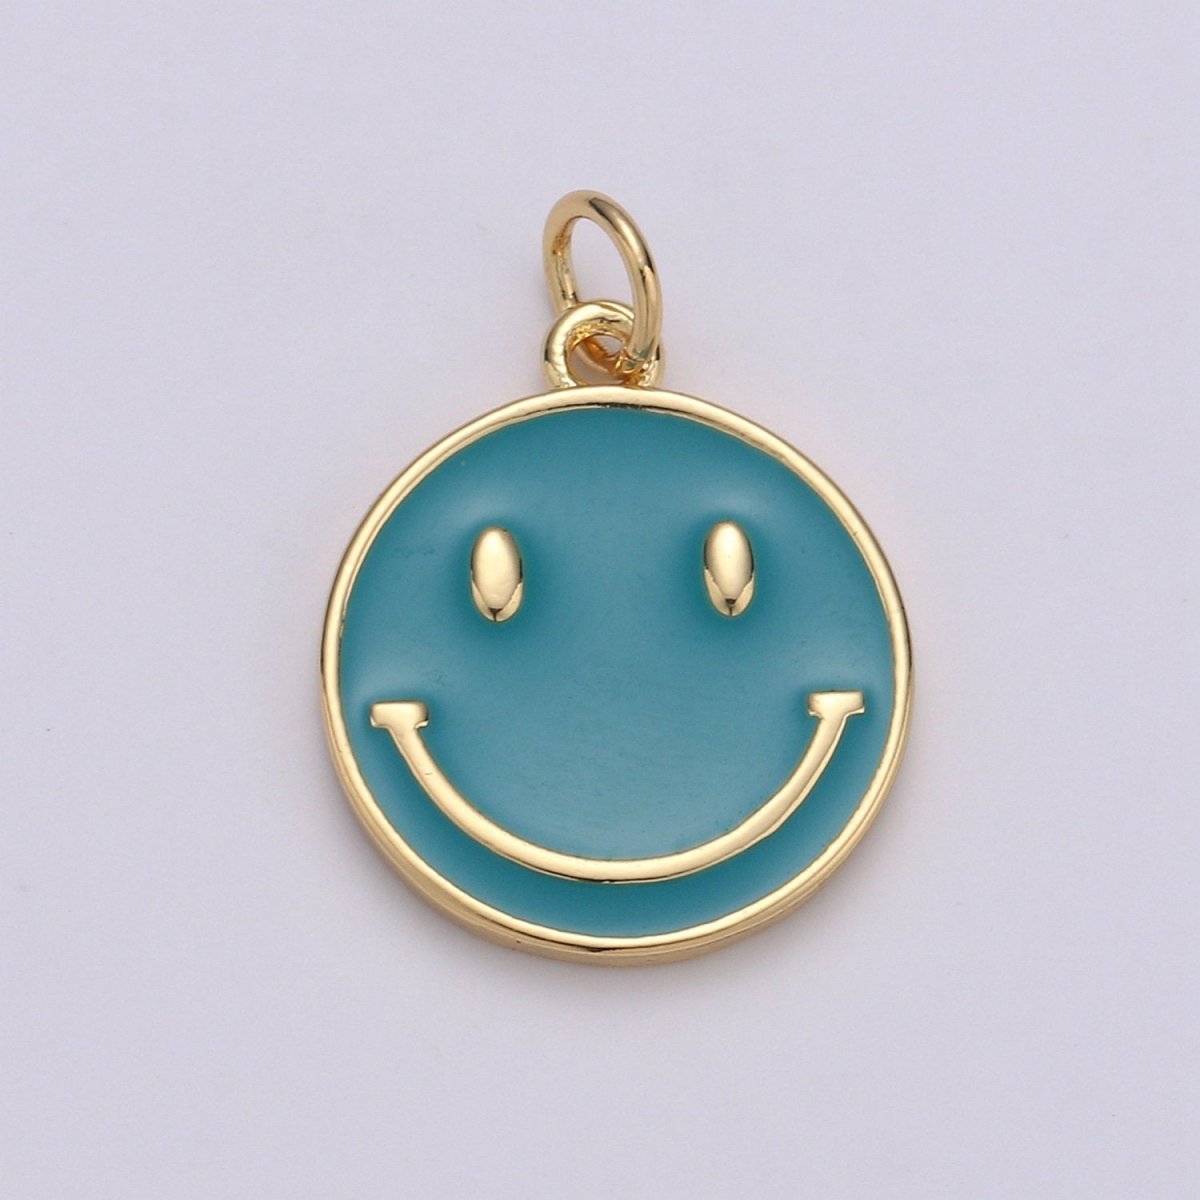 Epoxy Happy Face in Gold Round Charm, Enamel Happy Face Charm, Smiley Gold Enamel Charms, Dainty Smile charm, Teal, Red, White, Yellow, Cute Gold Smiley Face Gold Filled Charm - D-136 TO D-145 - DLUXCA